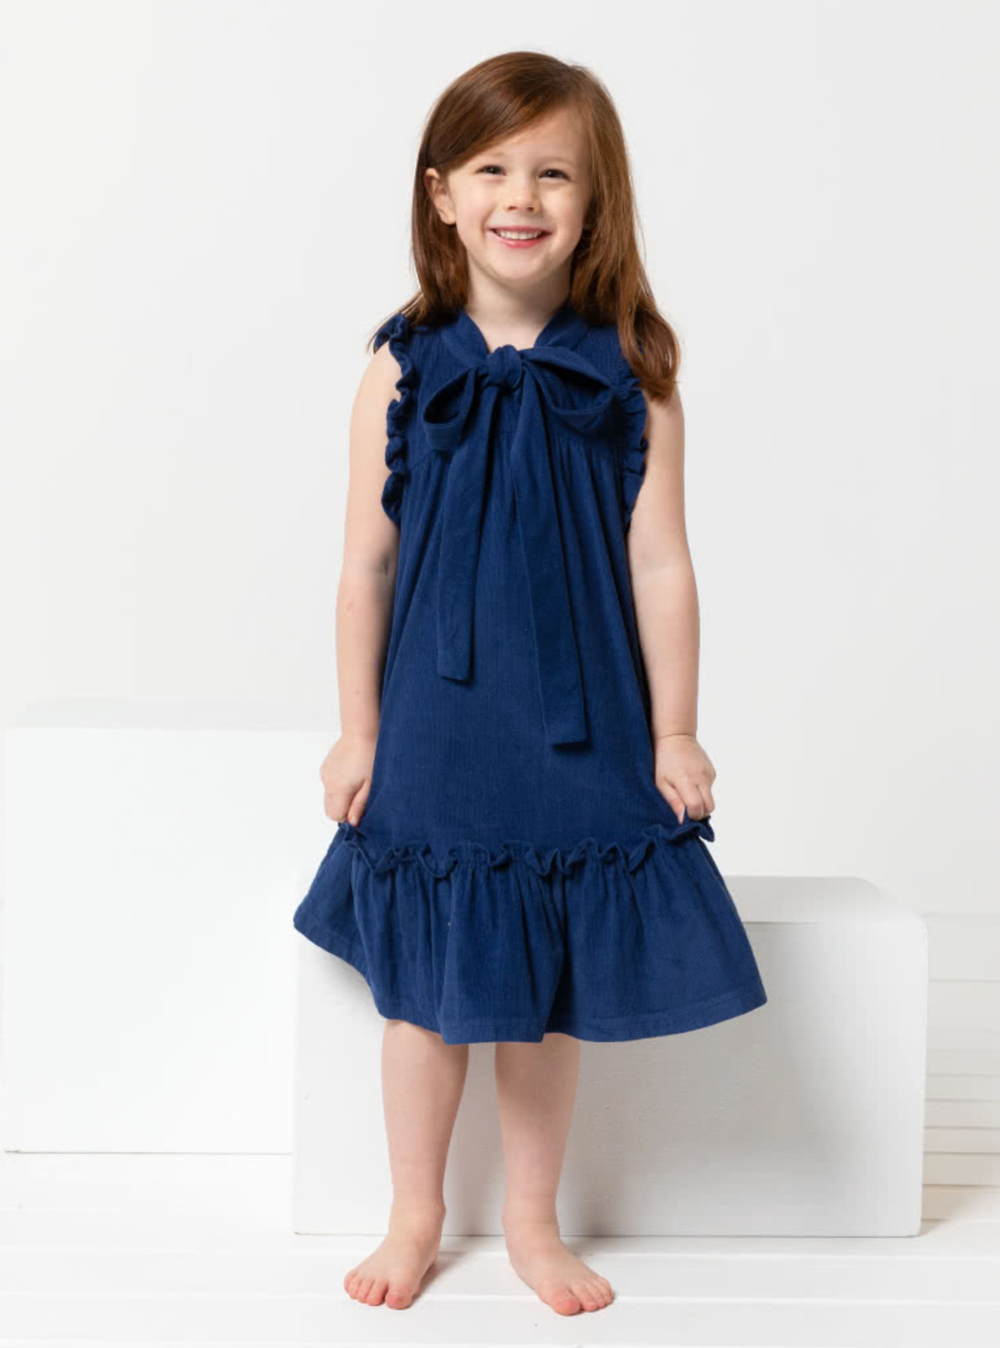 Child wearing the Children's Bonnie Dress sewing pattern from Style Arc on The Fold Line. A dress pattern made in linen, rayon, or cotton fabrics, featuring an A-line swing shape, front and back yokes, gathered armhole and hem frills, neck tie and back ne